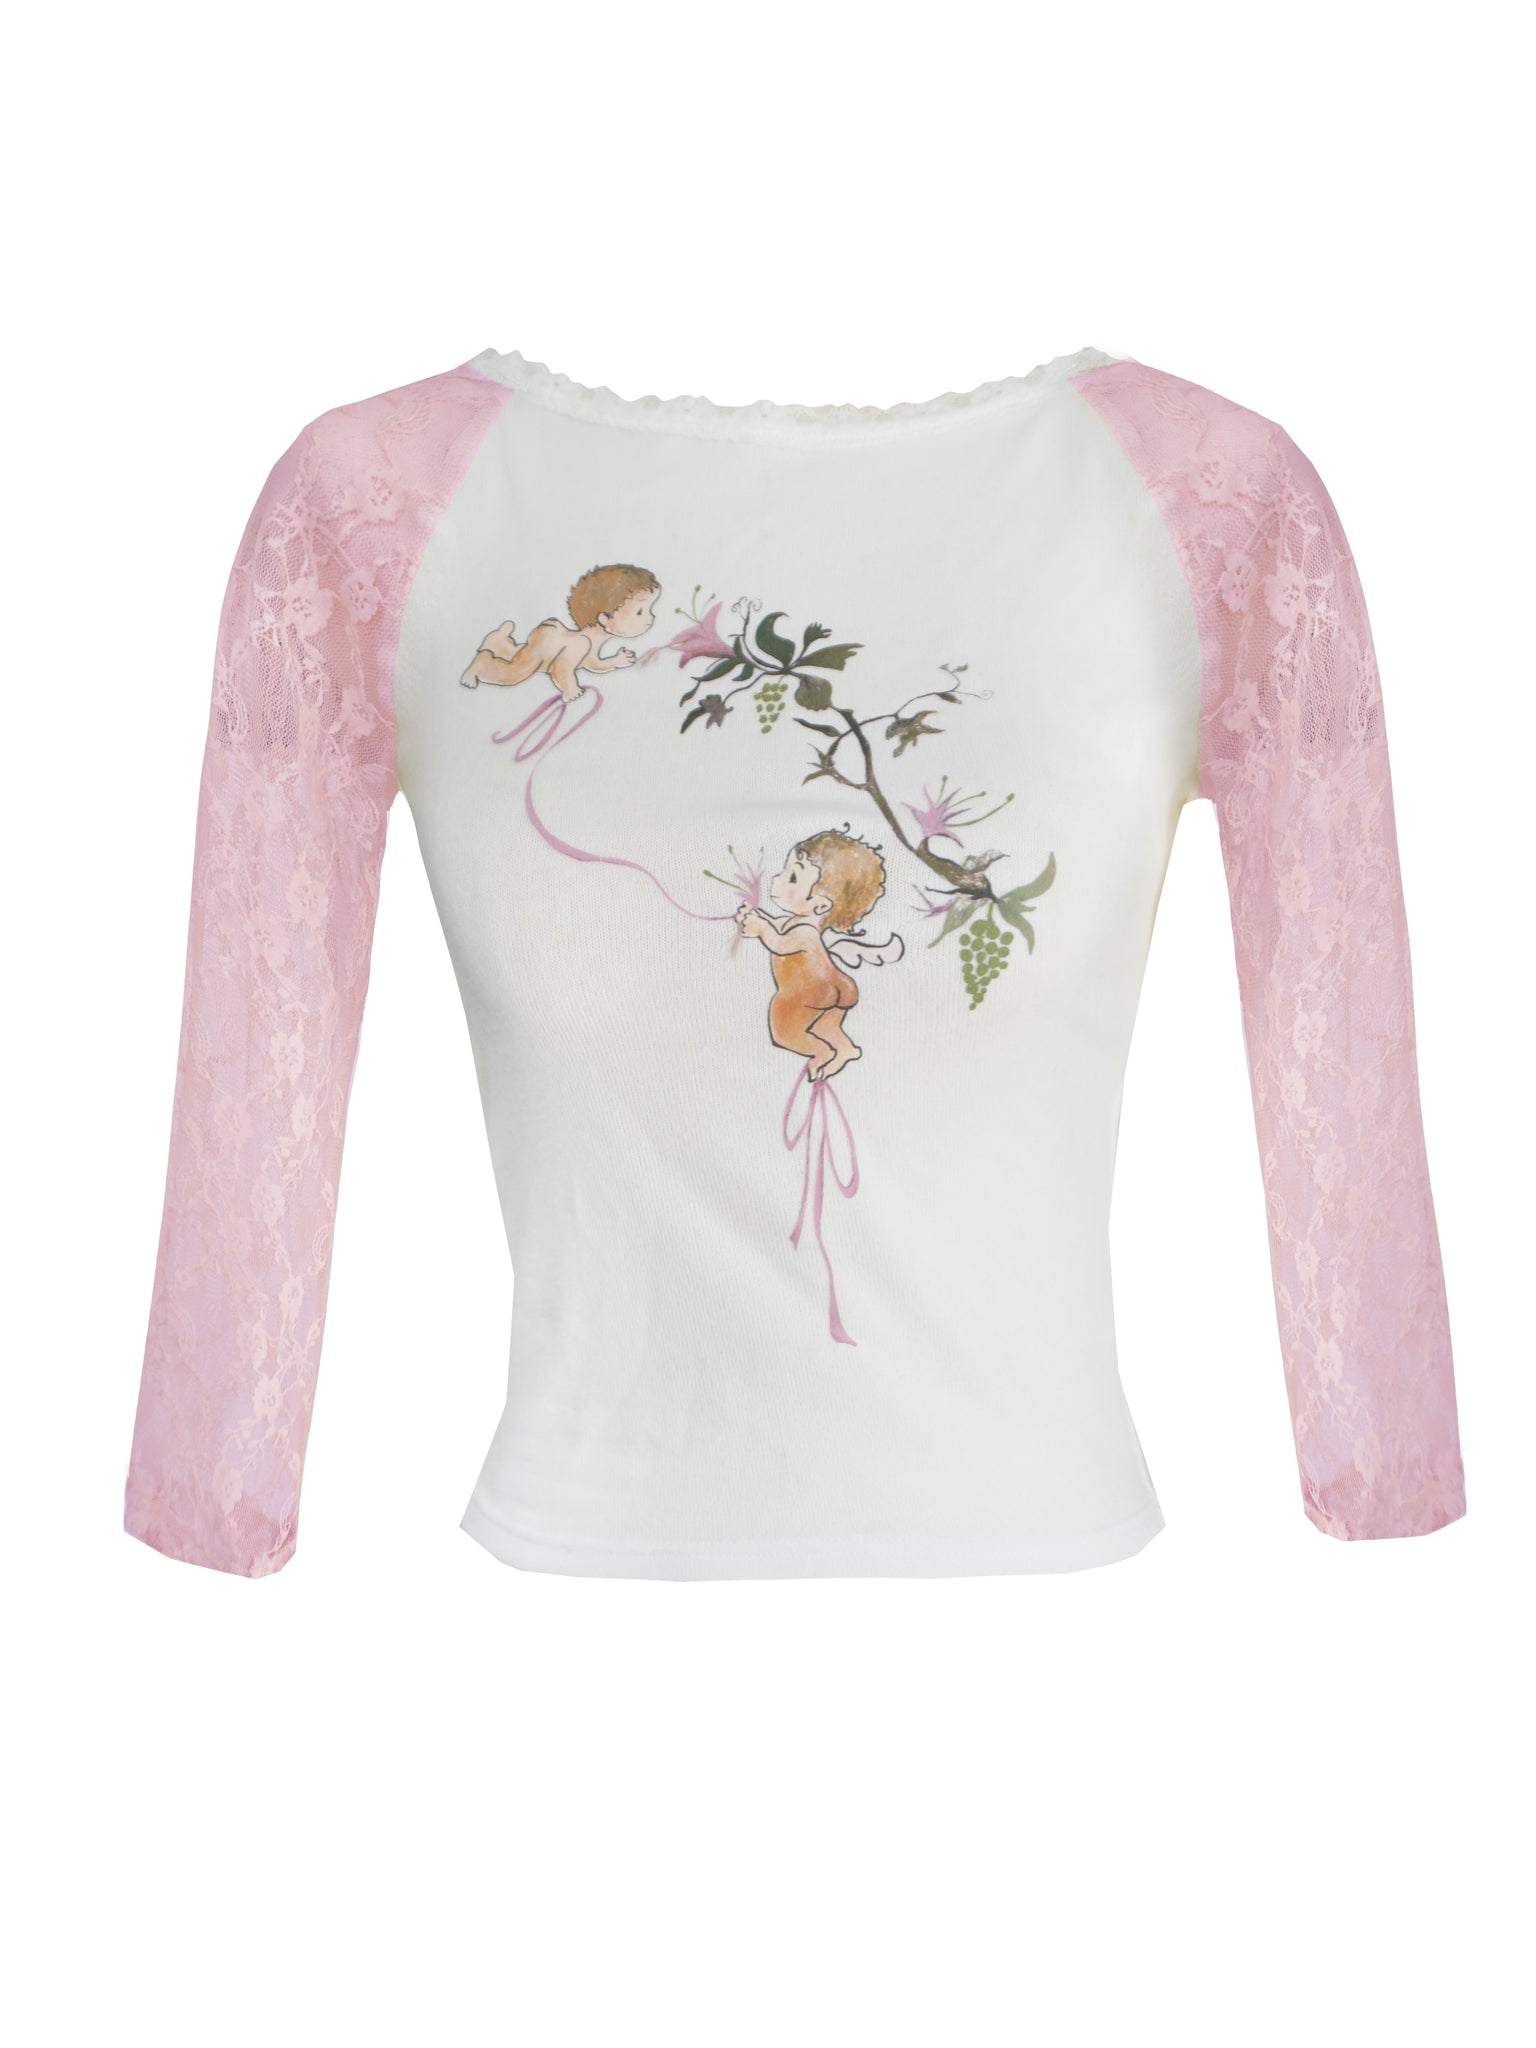 Cupid Print Lace sleeve-pink